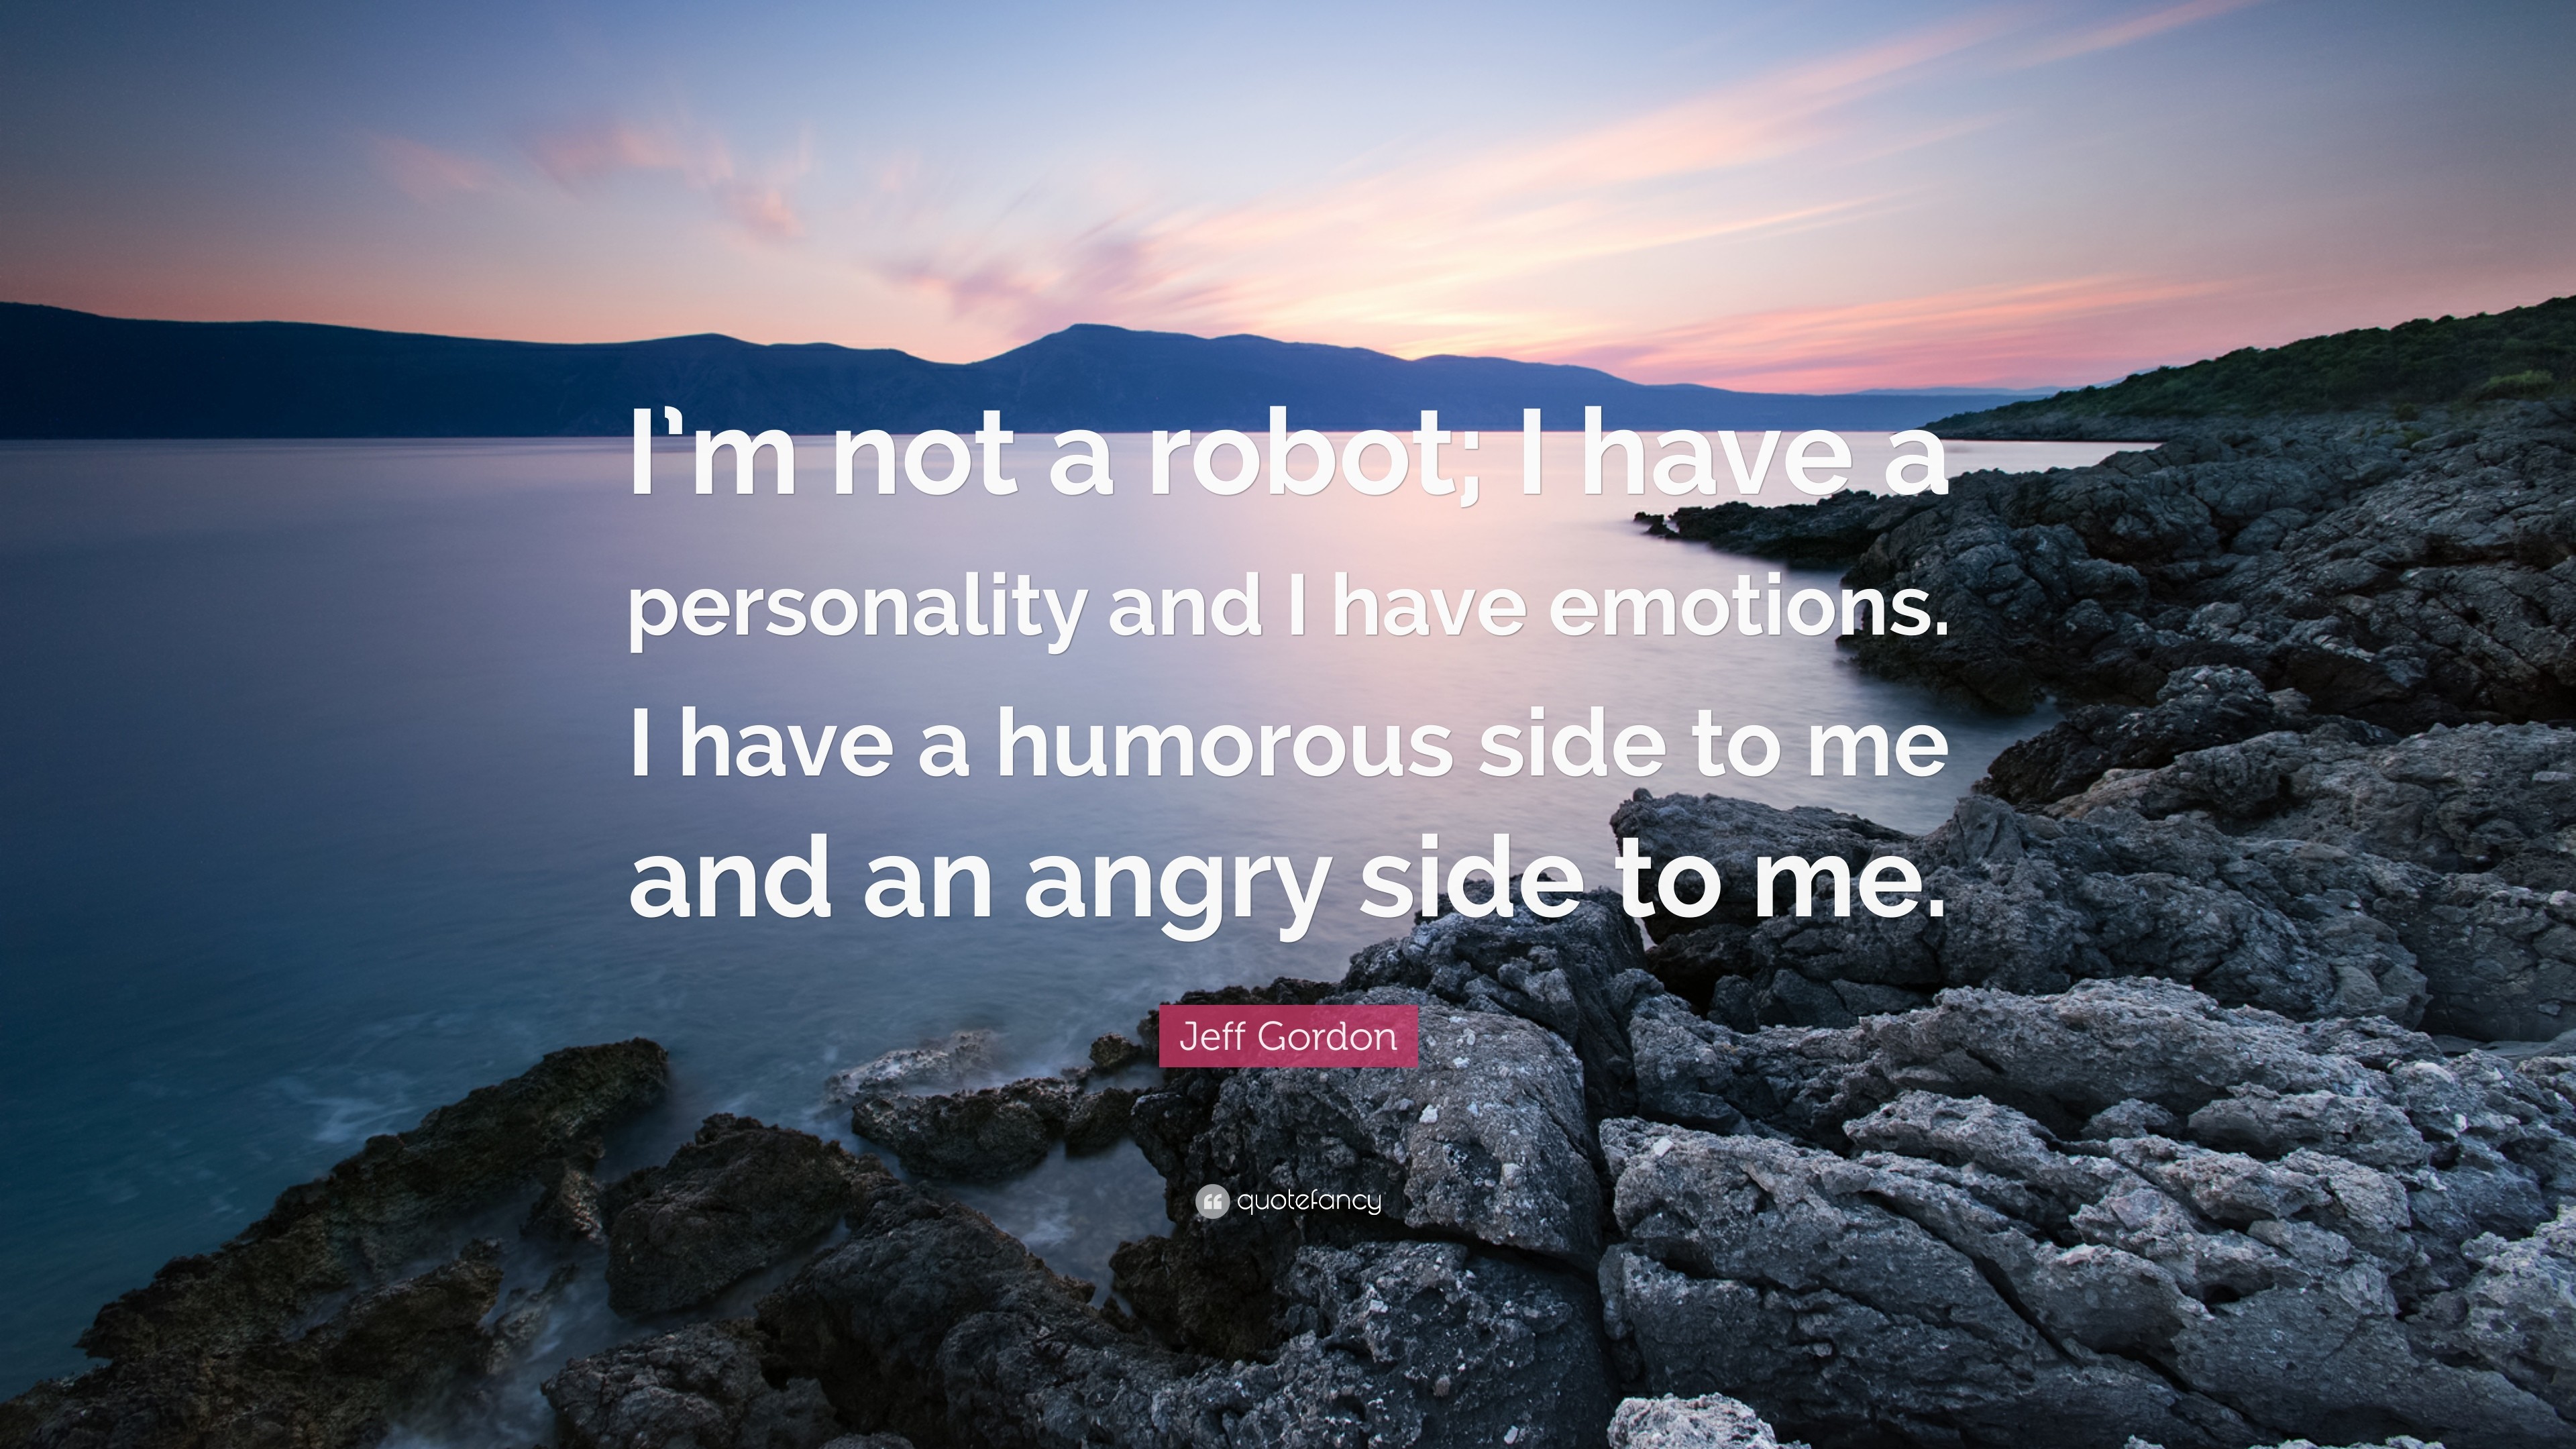 3840x2160 Jeff Gordon Quote: “I'm not a robot; I have a personality